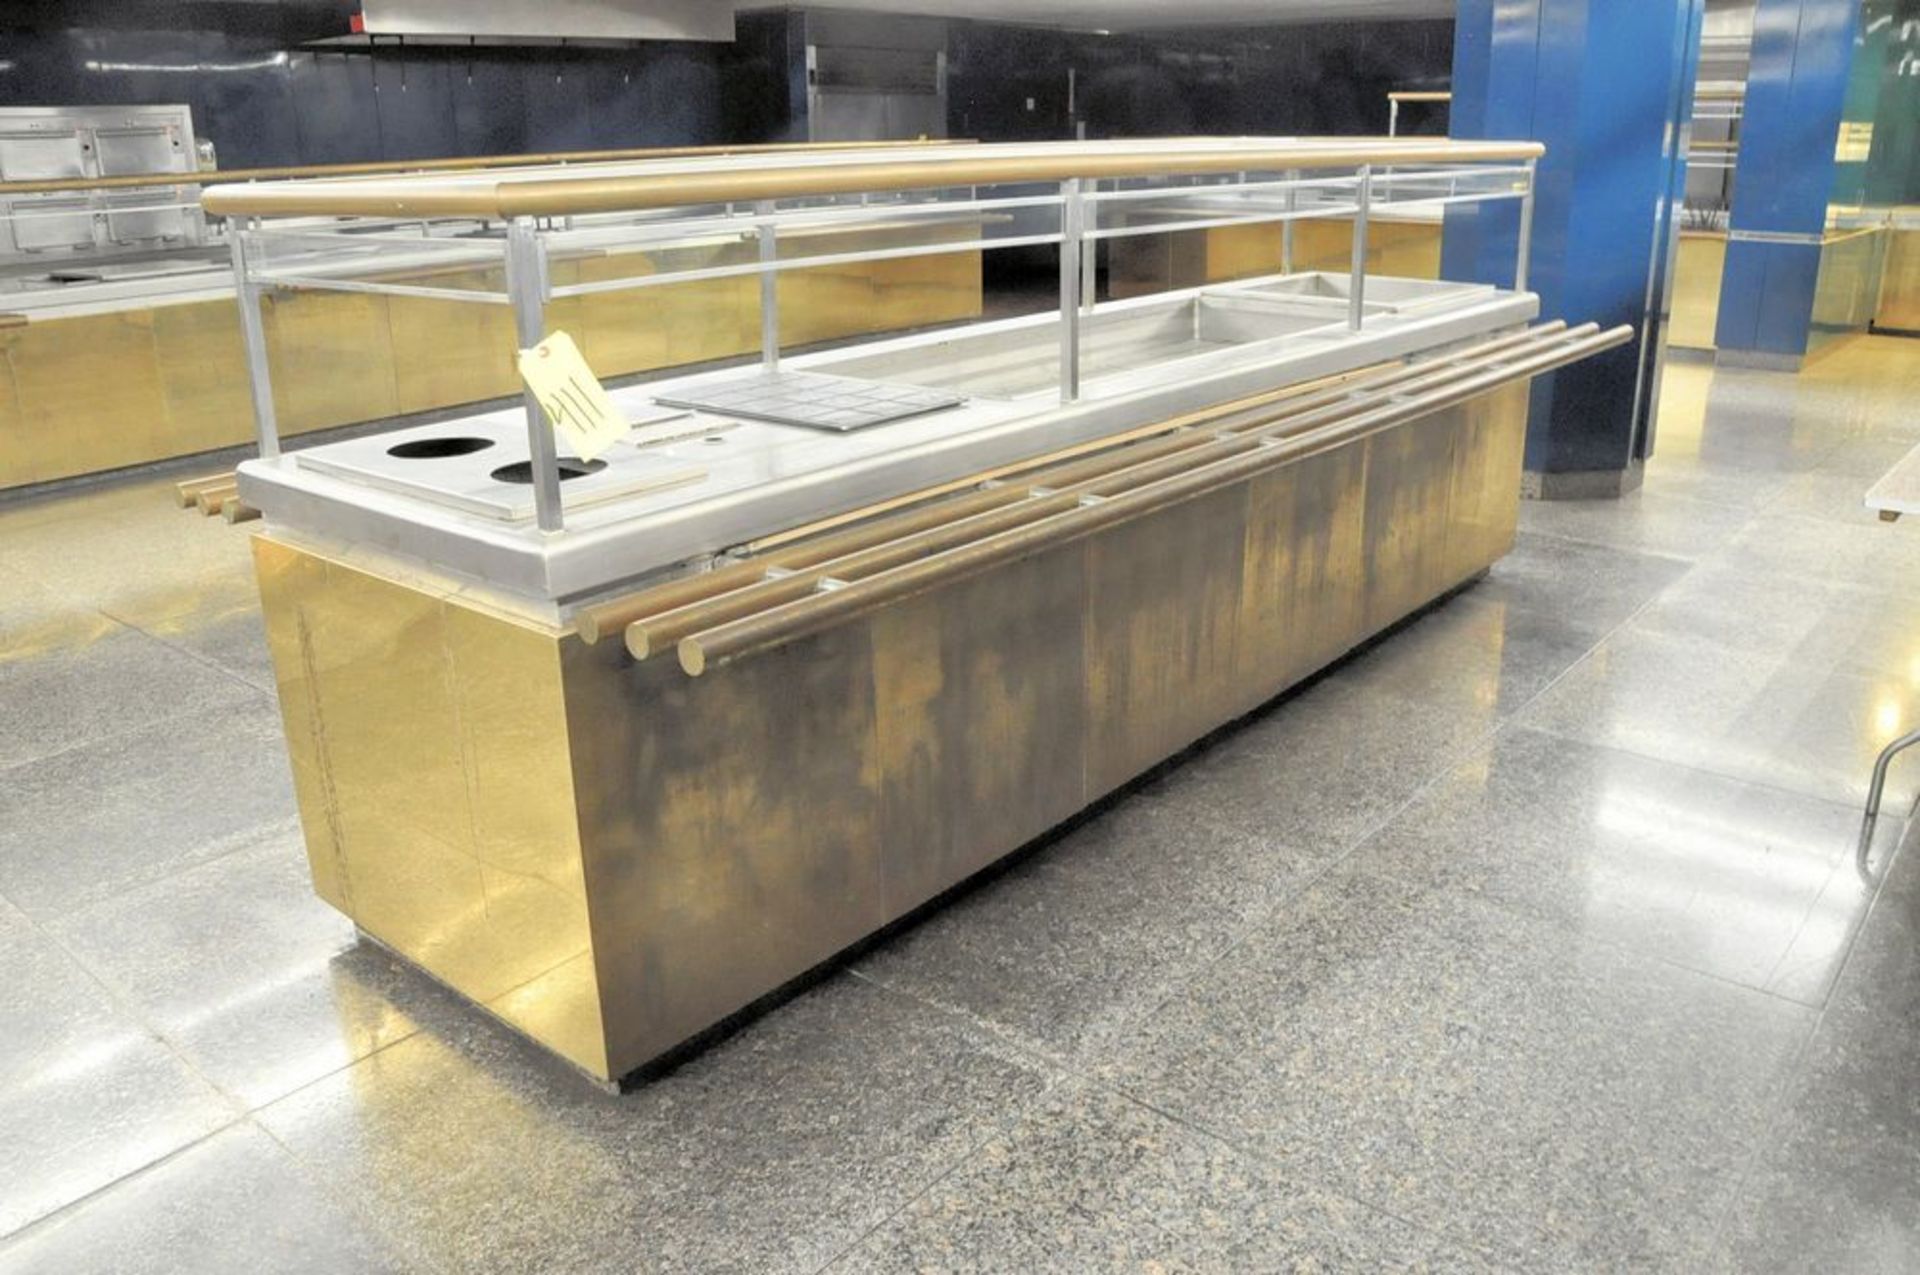 Stainless Steel Hot Foods Buffet Station, 3' x 12', Overhead Glass Sneeze Guard Hood - Image 2 of 8